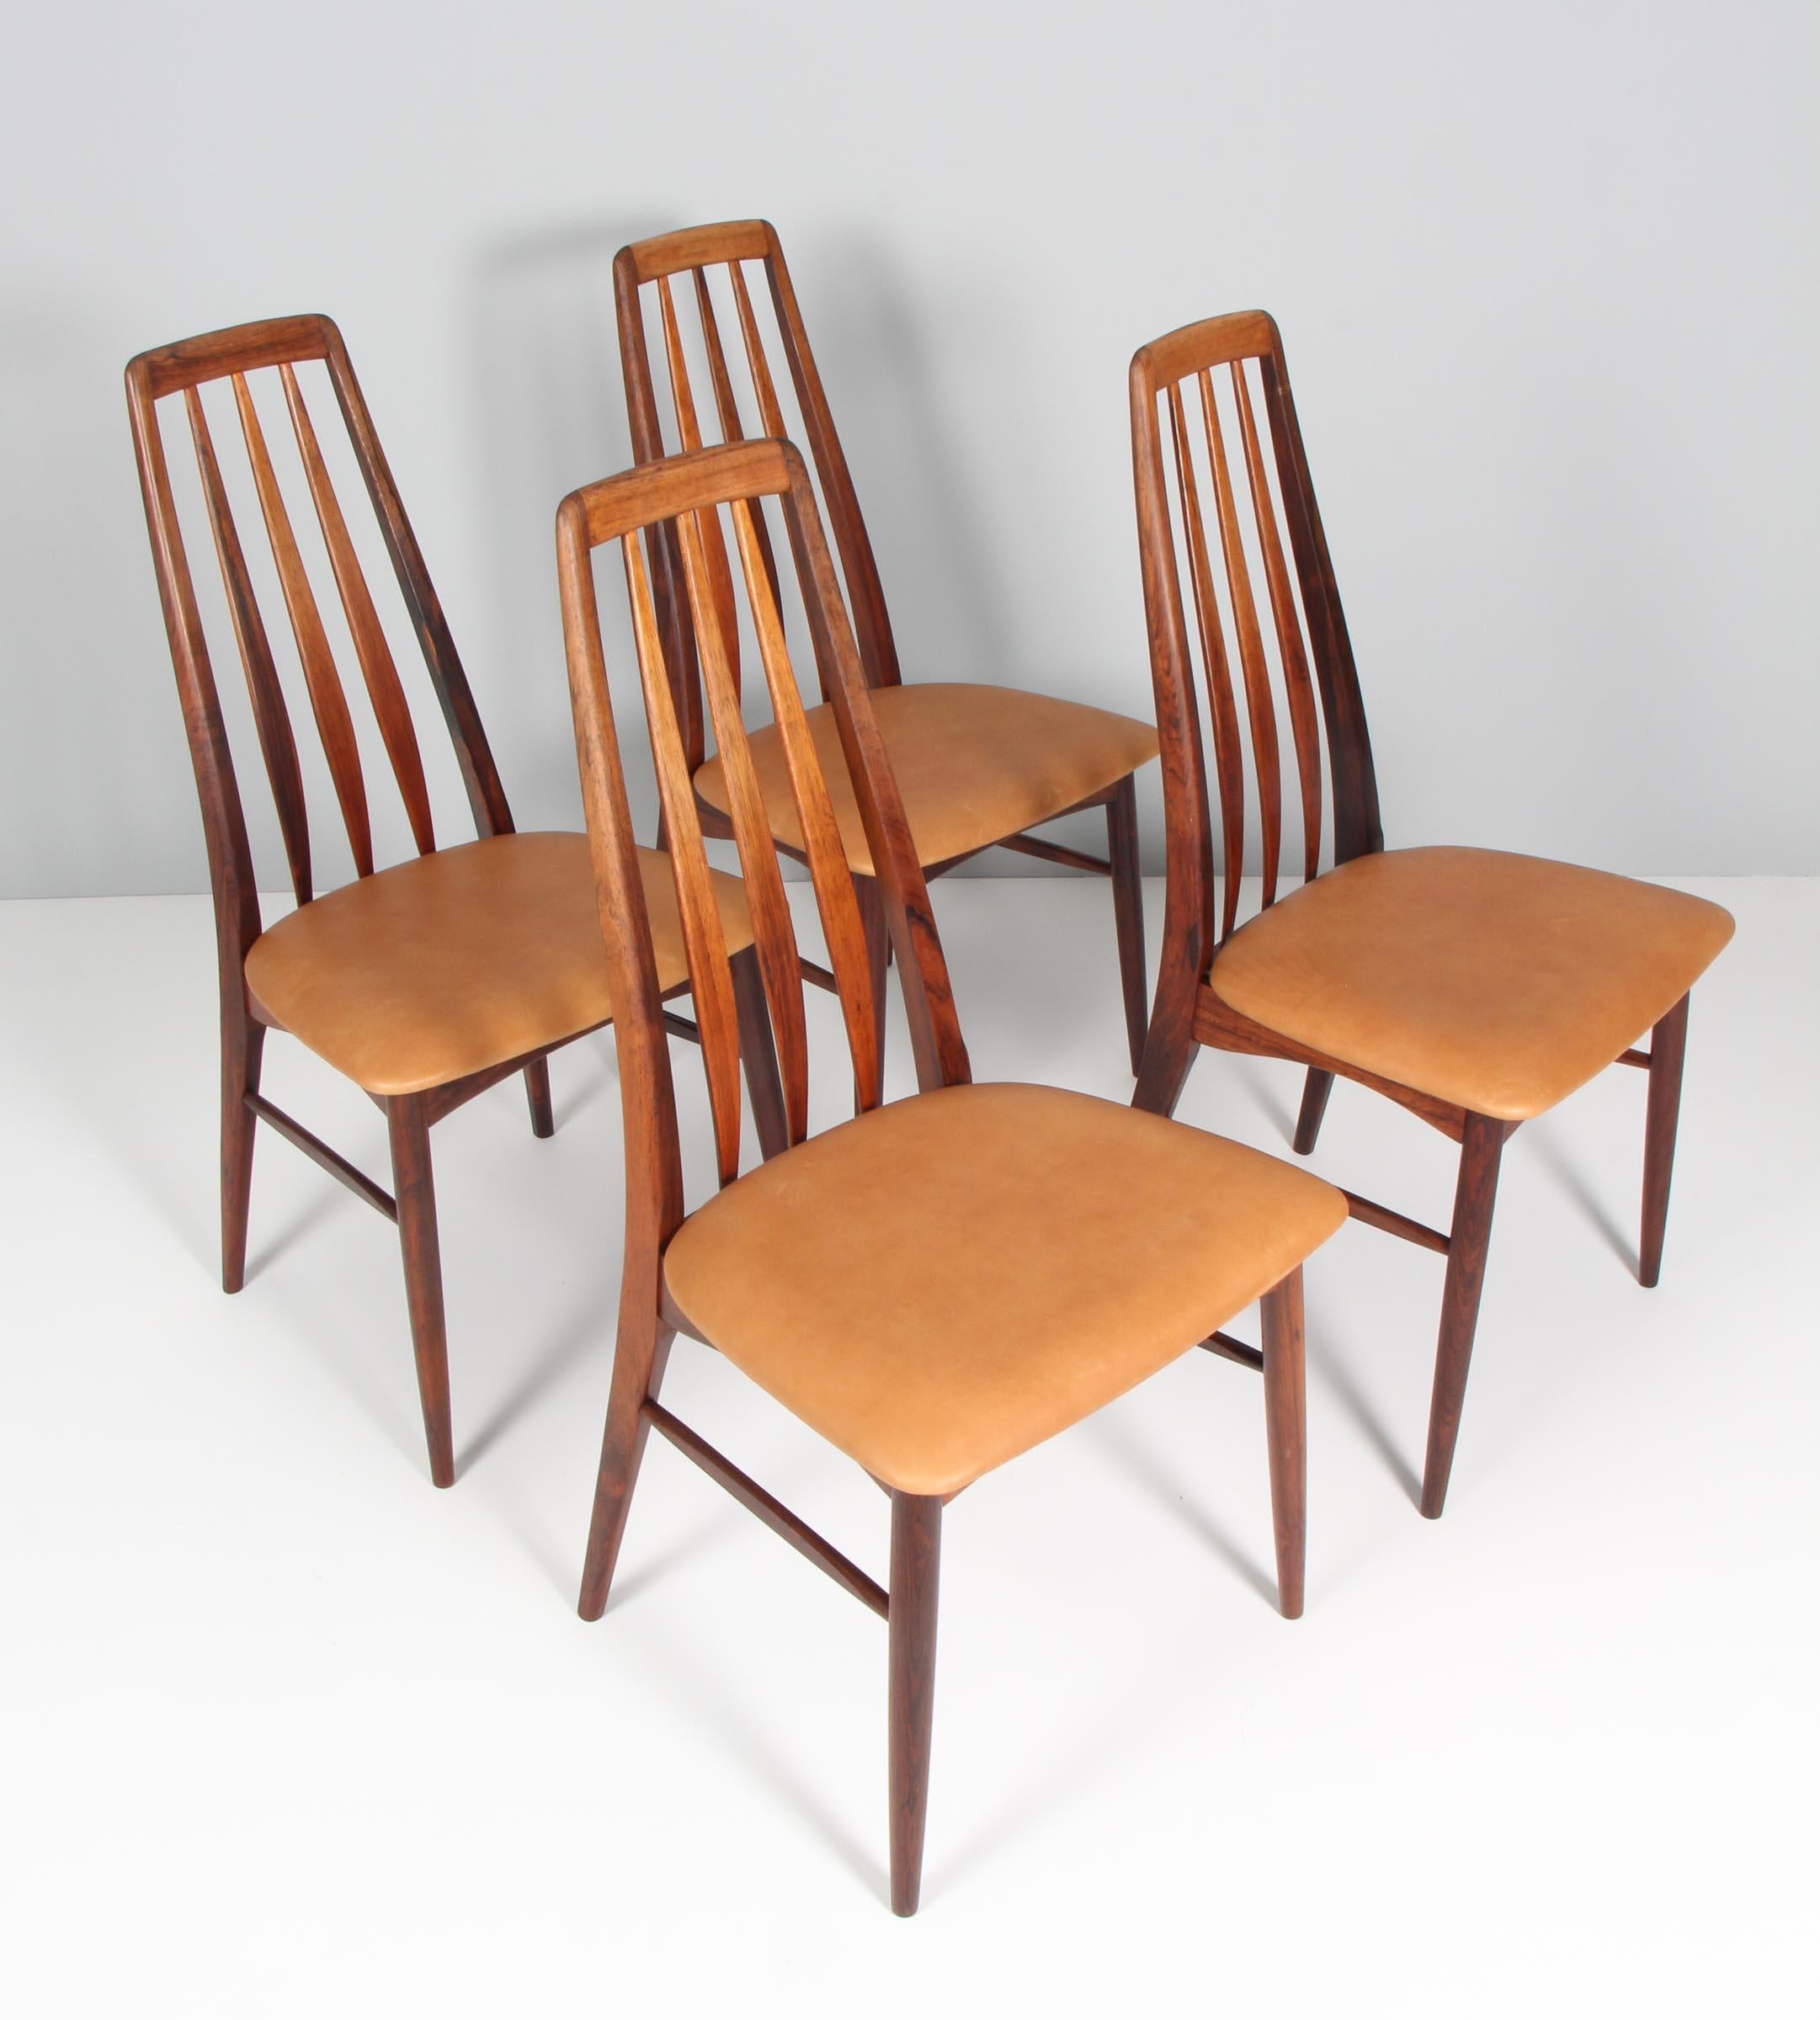 Niels Koefoed dining chairs made in solid rosewood.

New upholstered in tan vintage aniline leather.

Model Eva, made by Niels Koefoeds Møbelfabrik Hornslet, 1960s.

